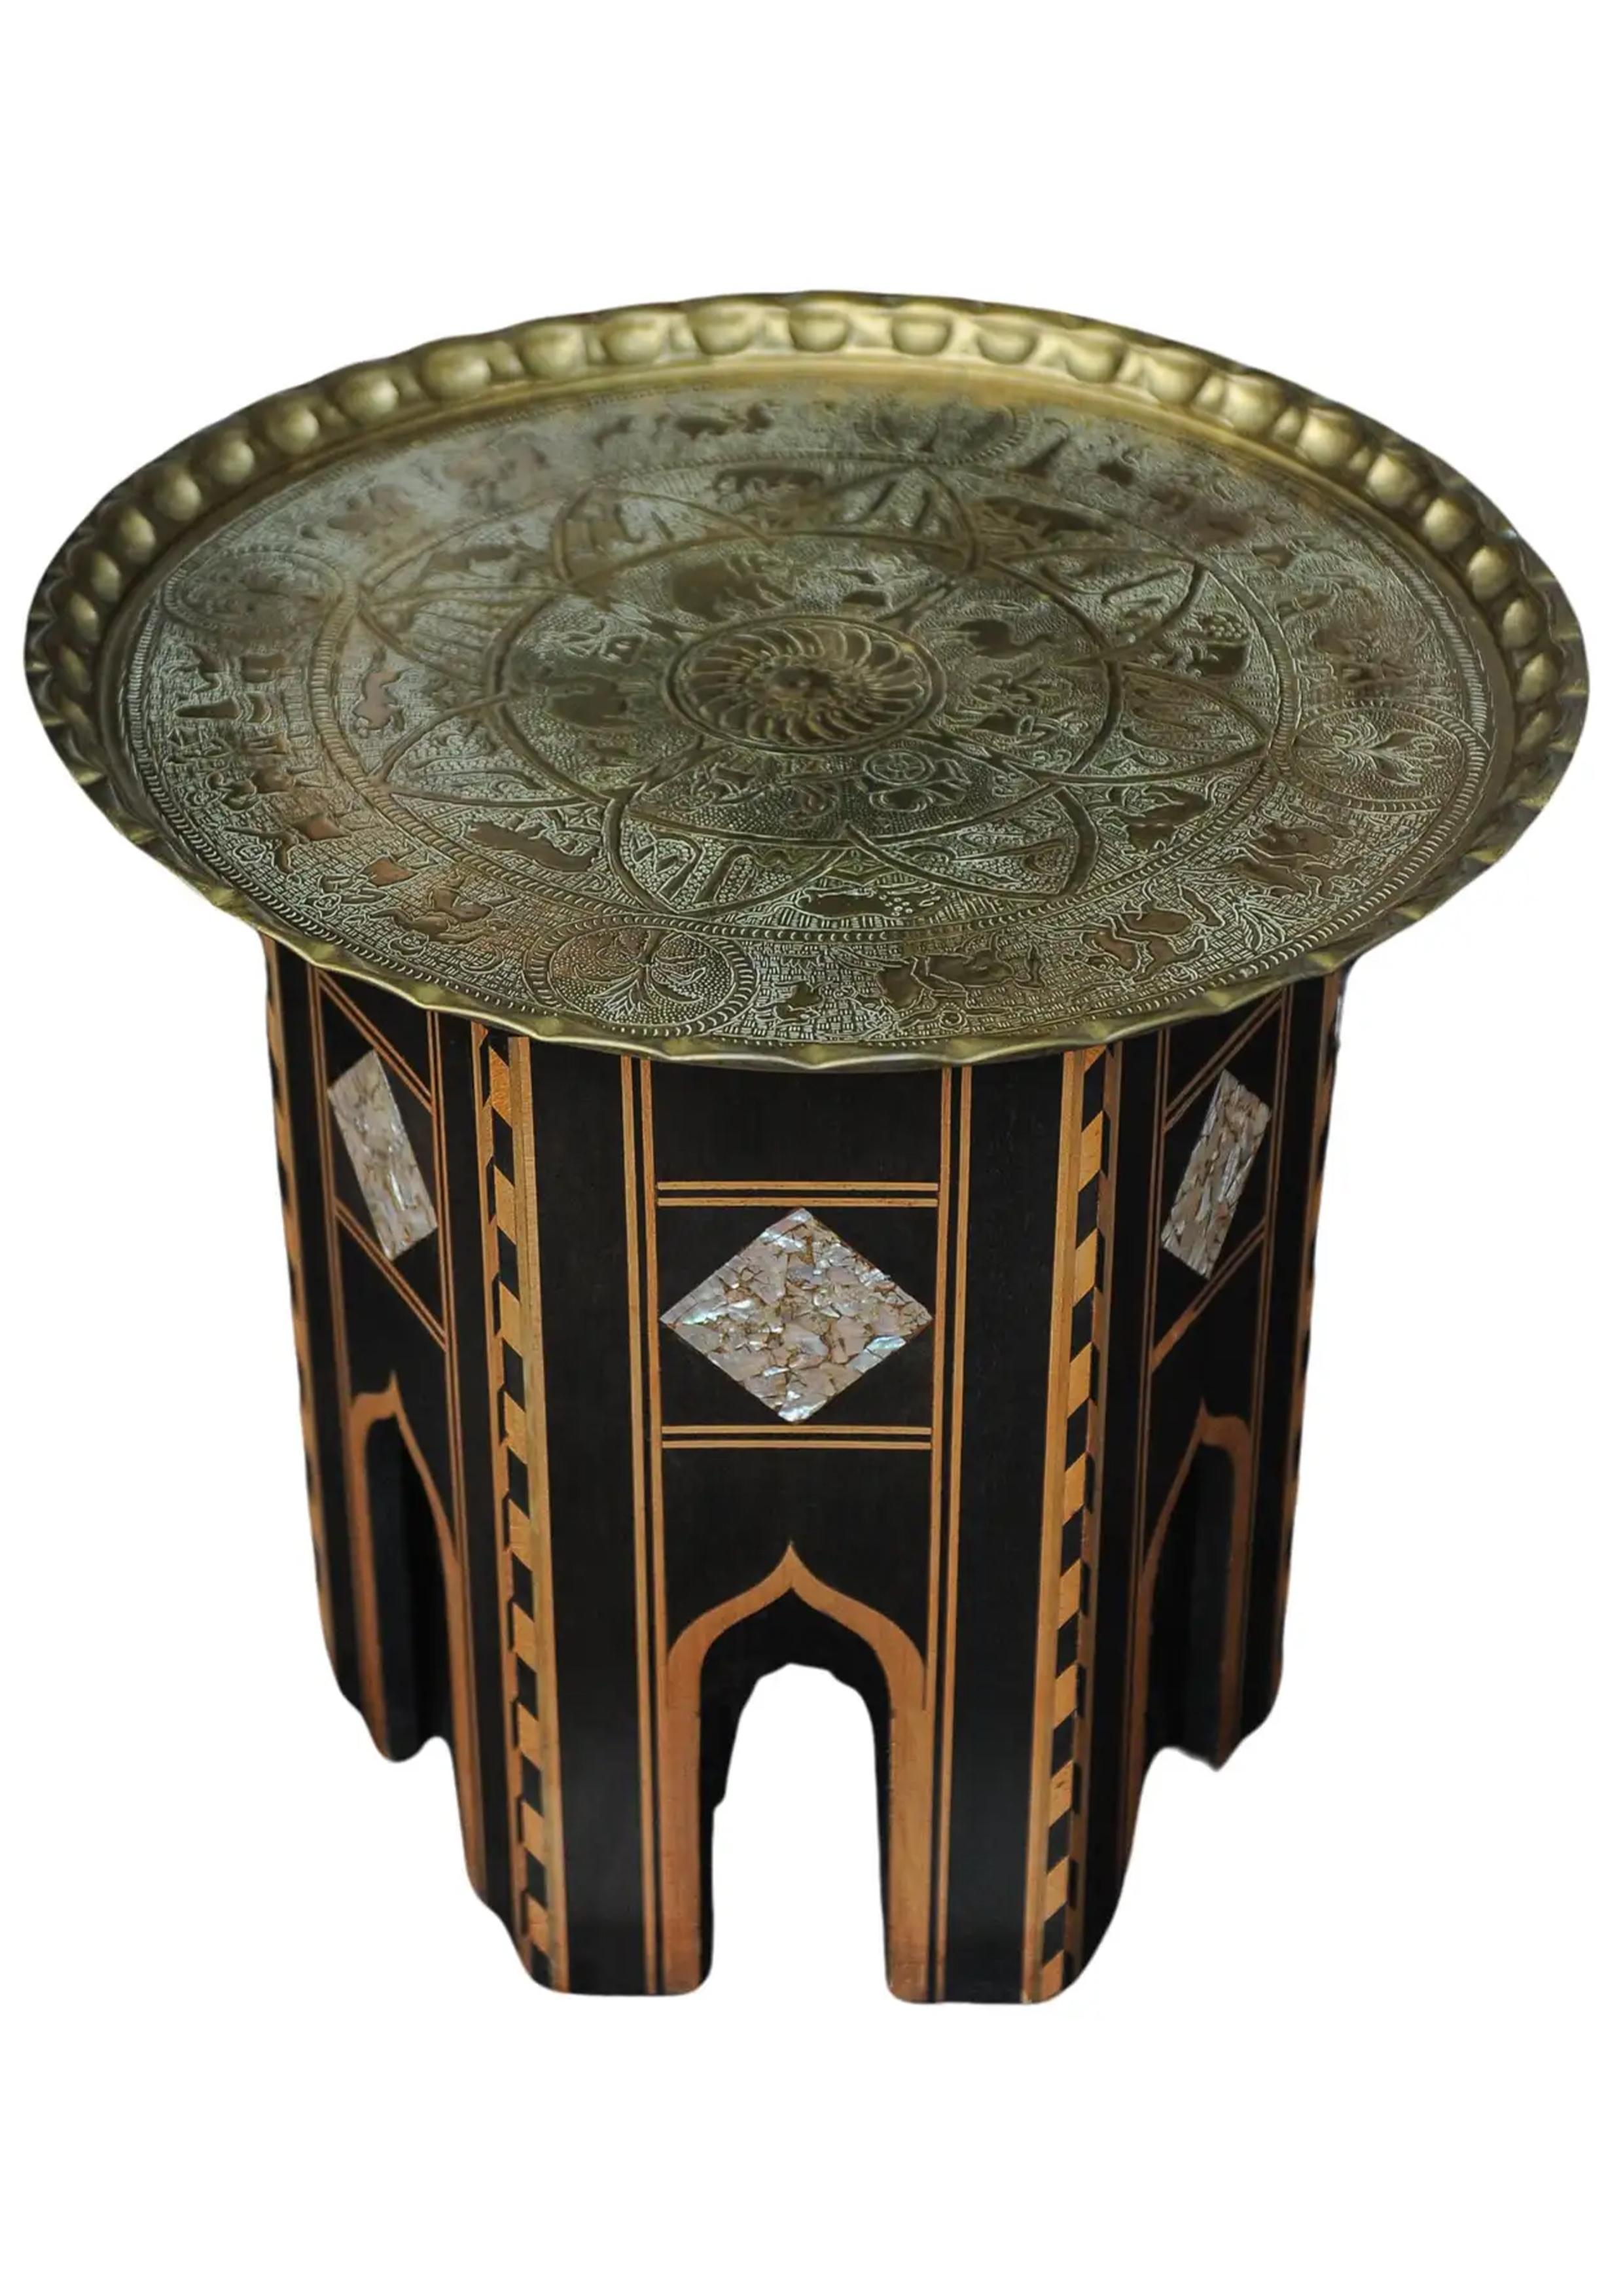 Syrian A Middle Eastern1540 Ebonised Tea Table With Removable Brass Decorative Tray  For Sale